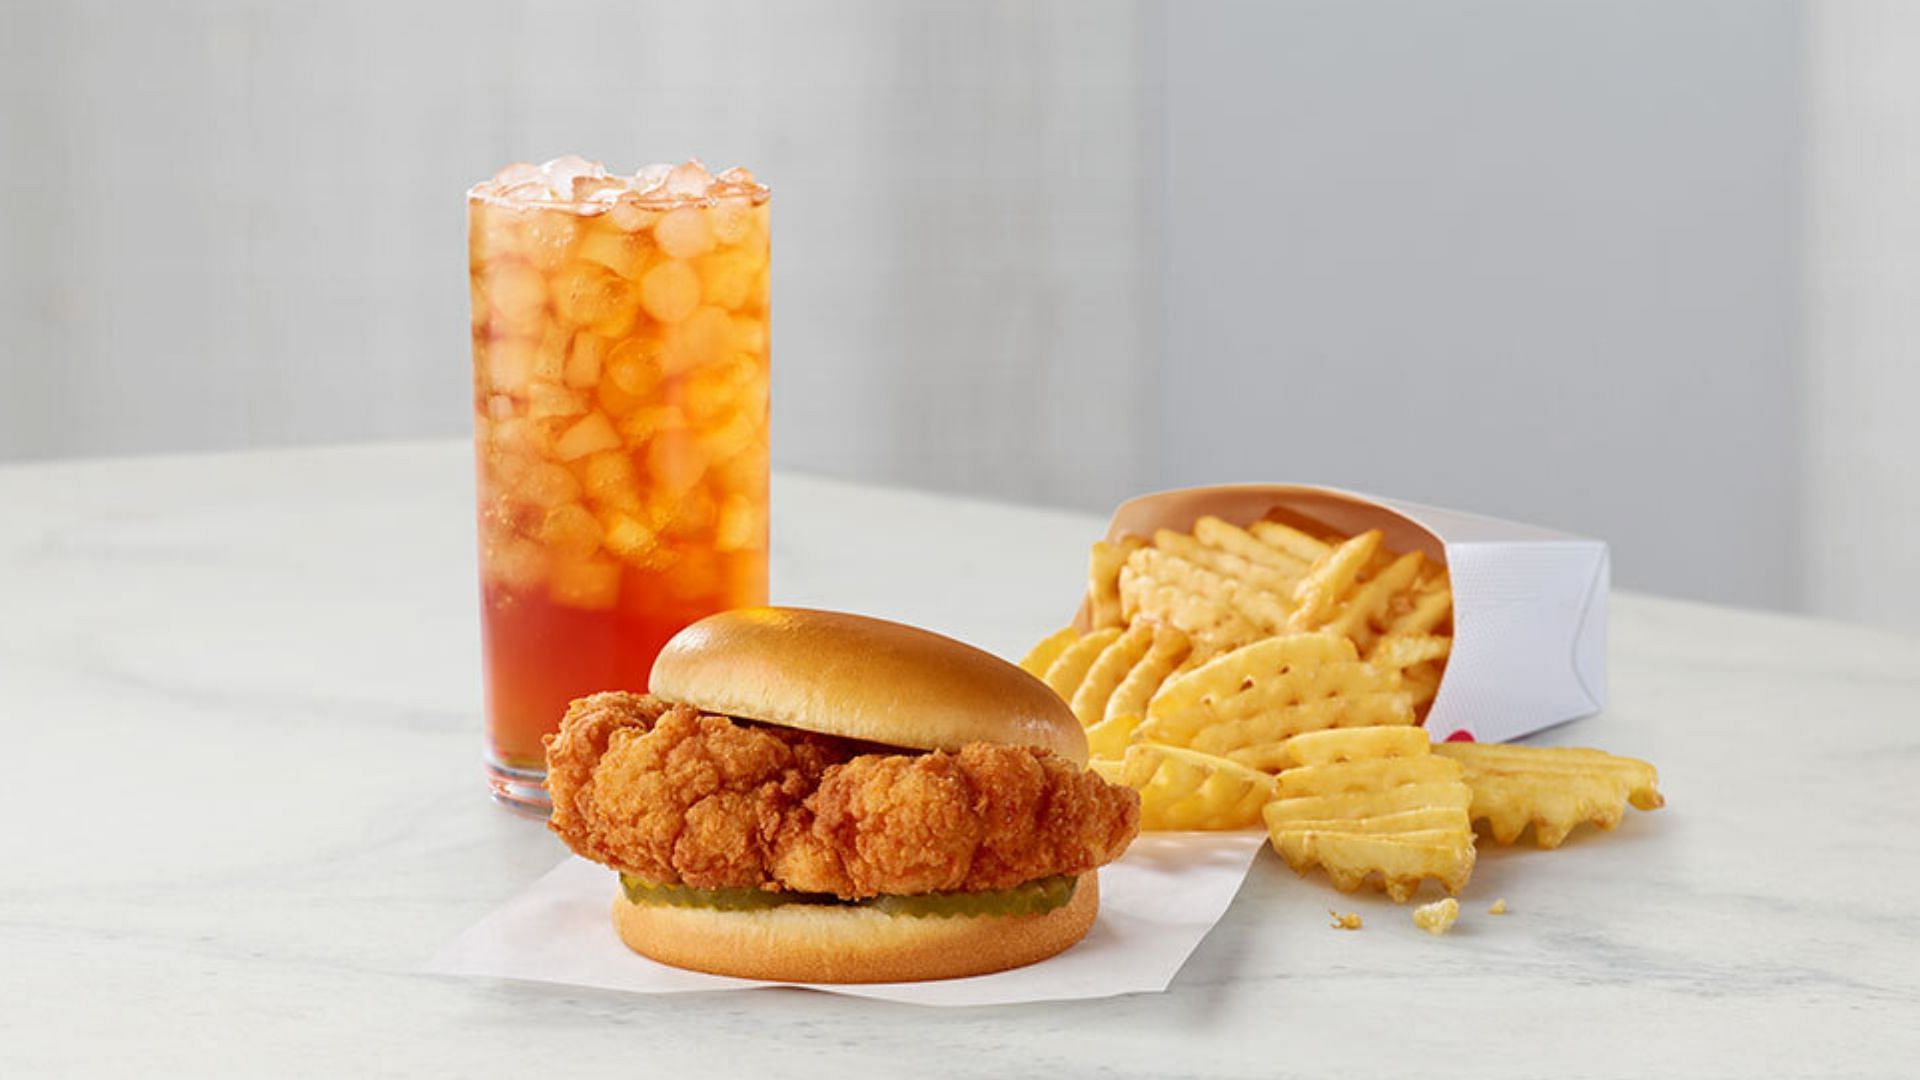 the new Cauliflower Sandwich is reportedly available for more than $7 at some locations (Image via Chick Fil A)